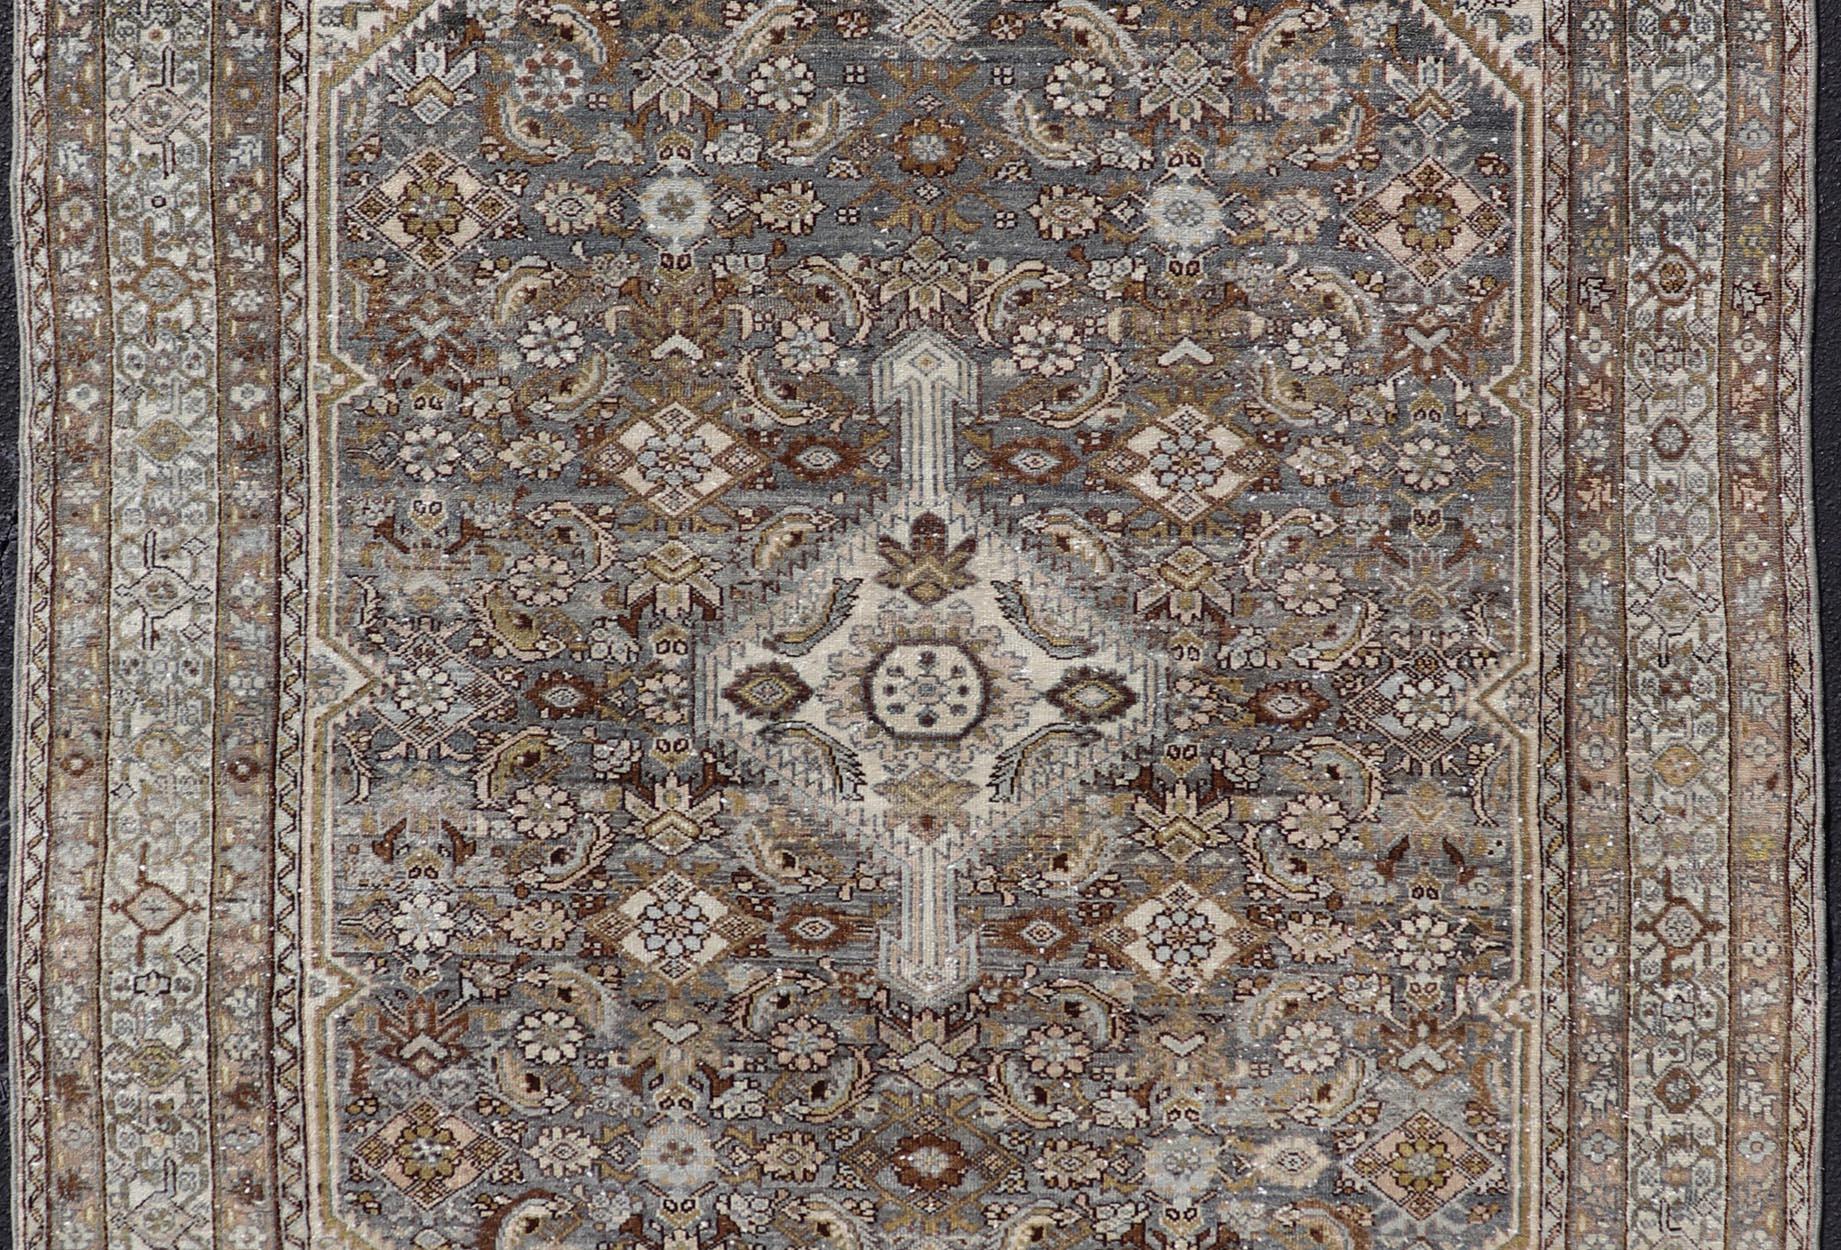 Antique Persian Bibikabad Carpet with Steal Blue, Charcoal, Green, and Brown  For Sale 1